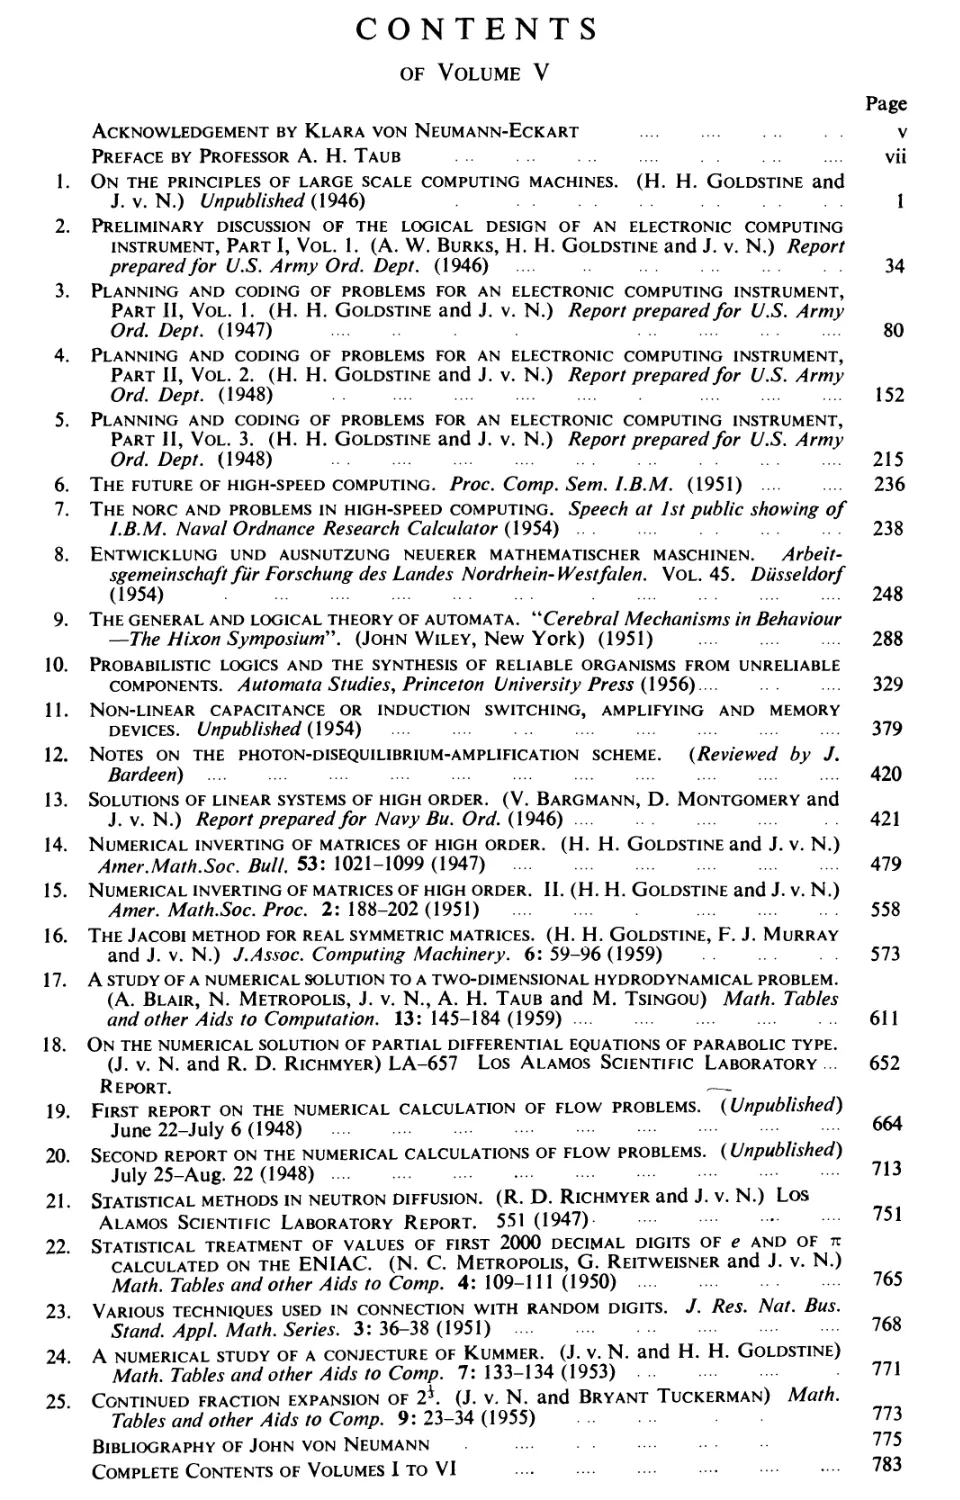 CONTENTS OF VOLUME V